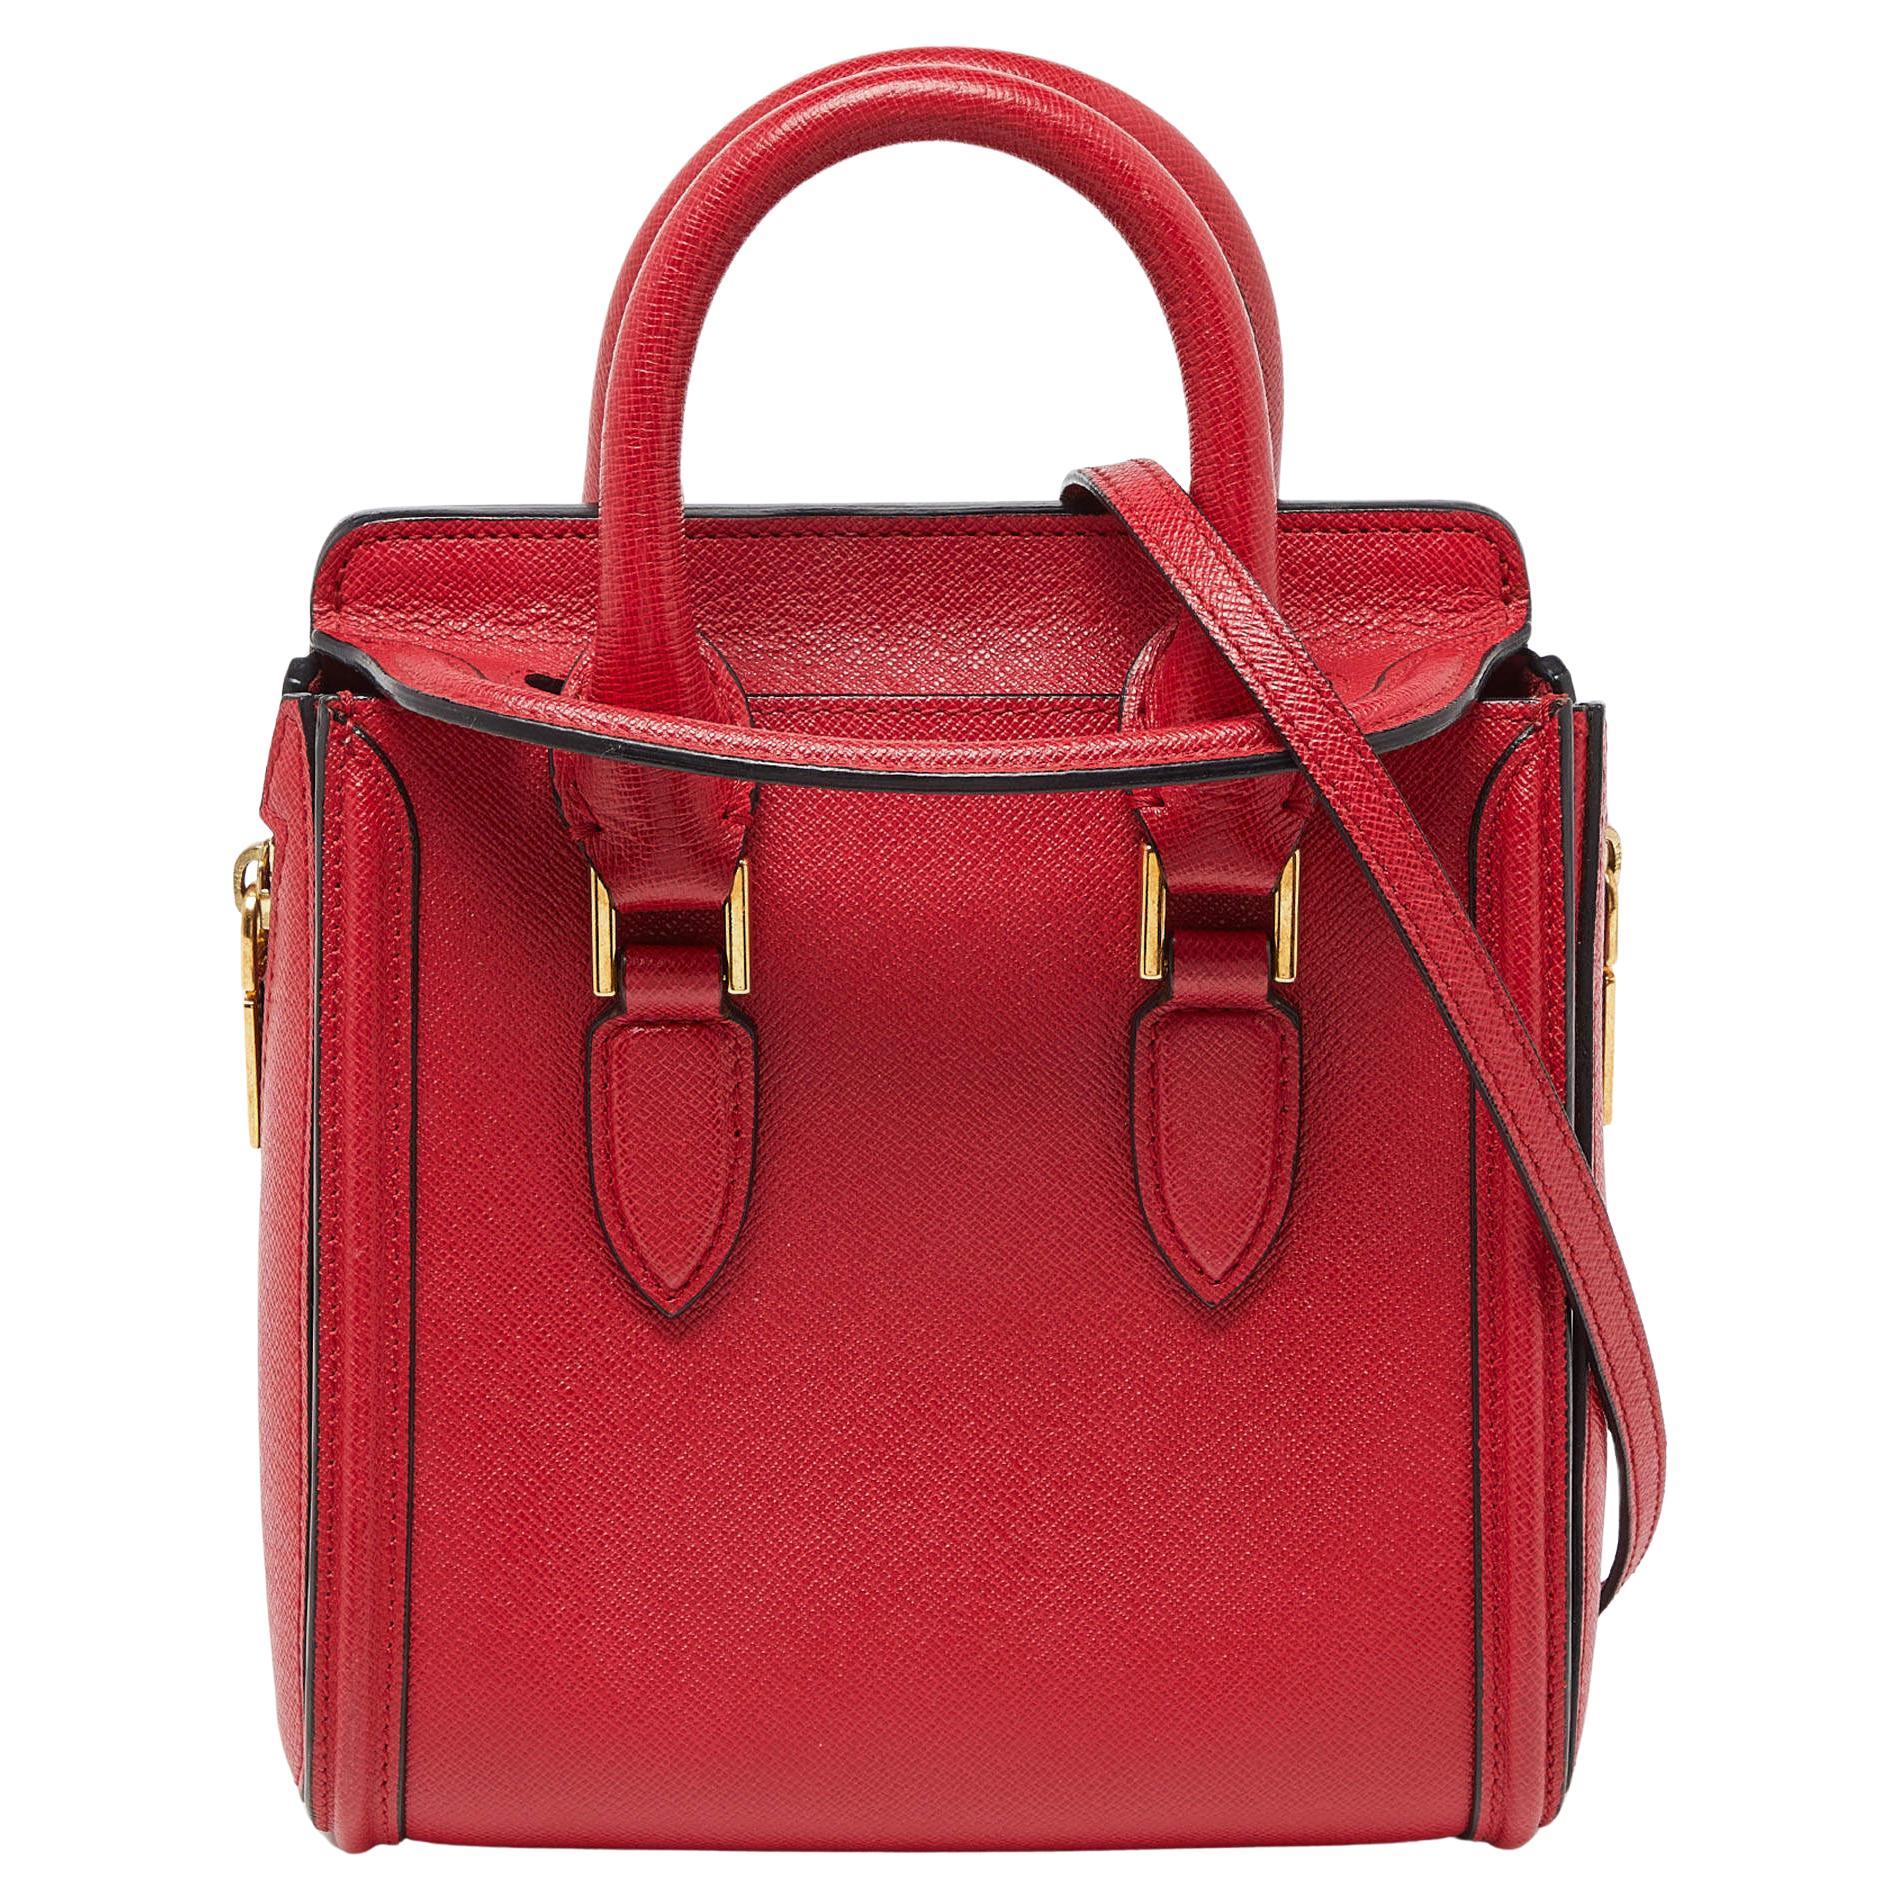 Alexander McQueen Red Leather Mini Heroine Bag For Sale